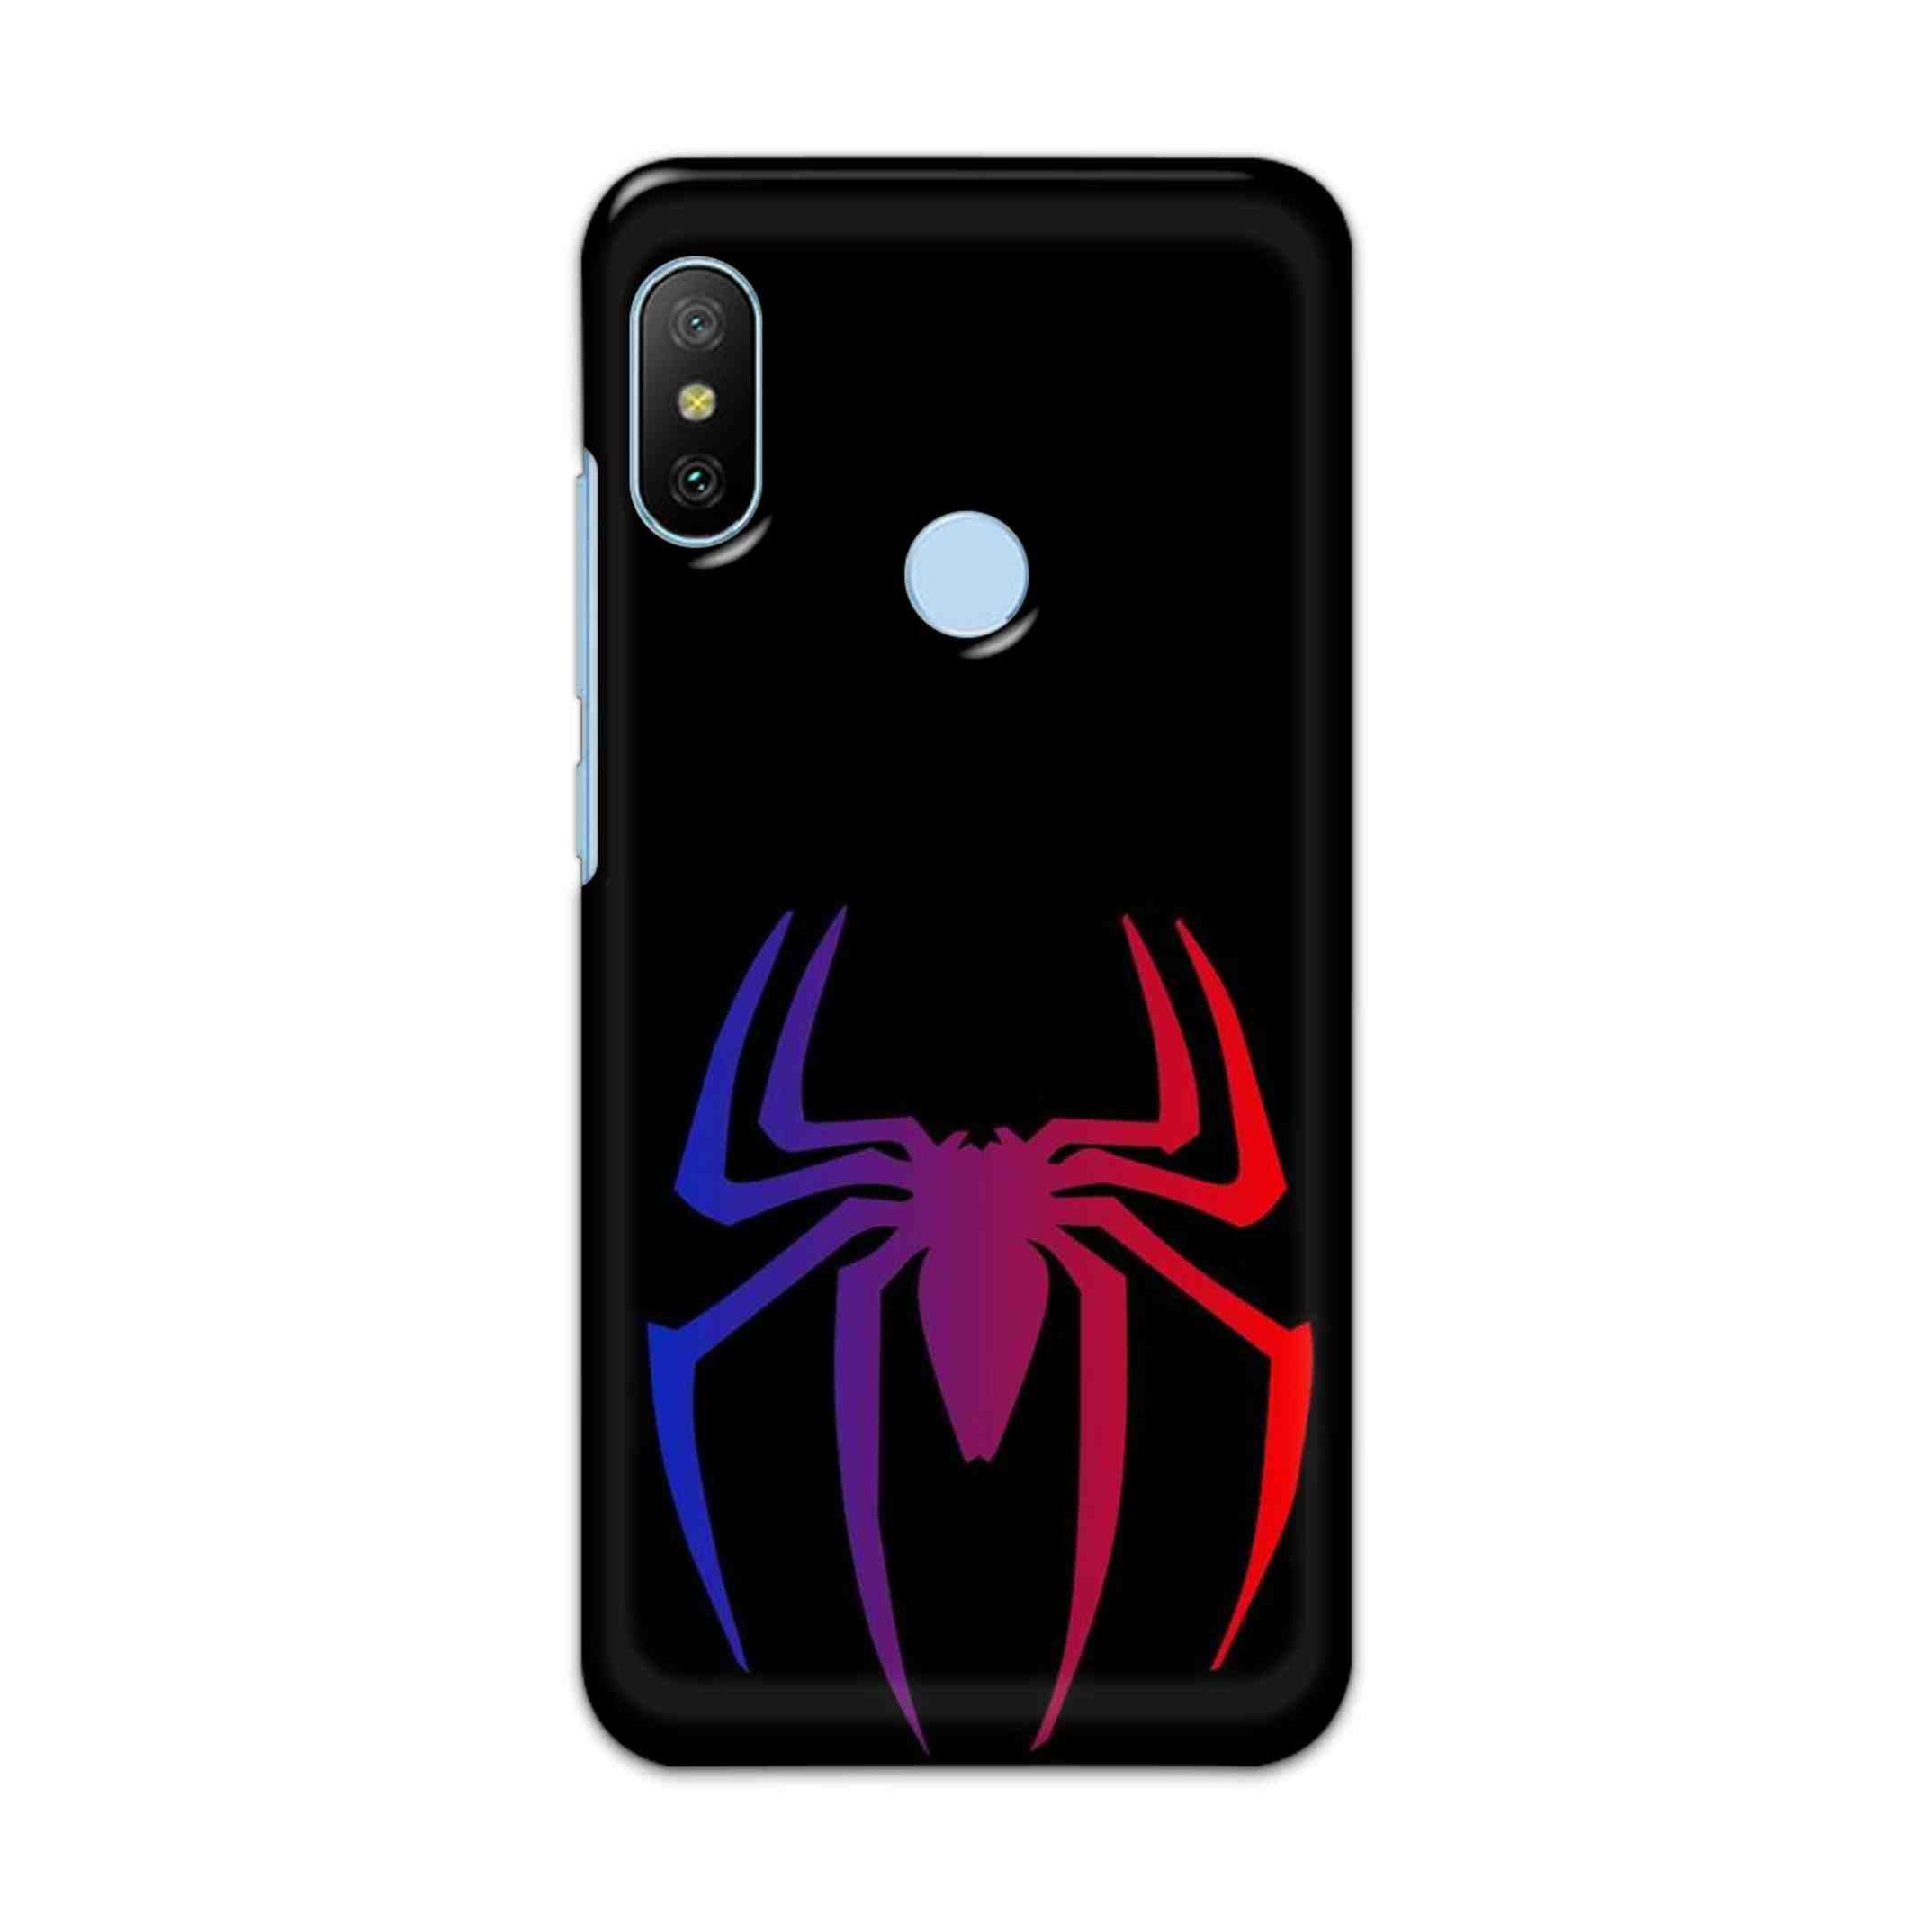 Buy Neon Spiderman Logo Hard Back Mobile Phone Case/Cover For Xiaomi Redmi 6 Pro Online